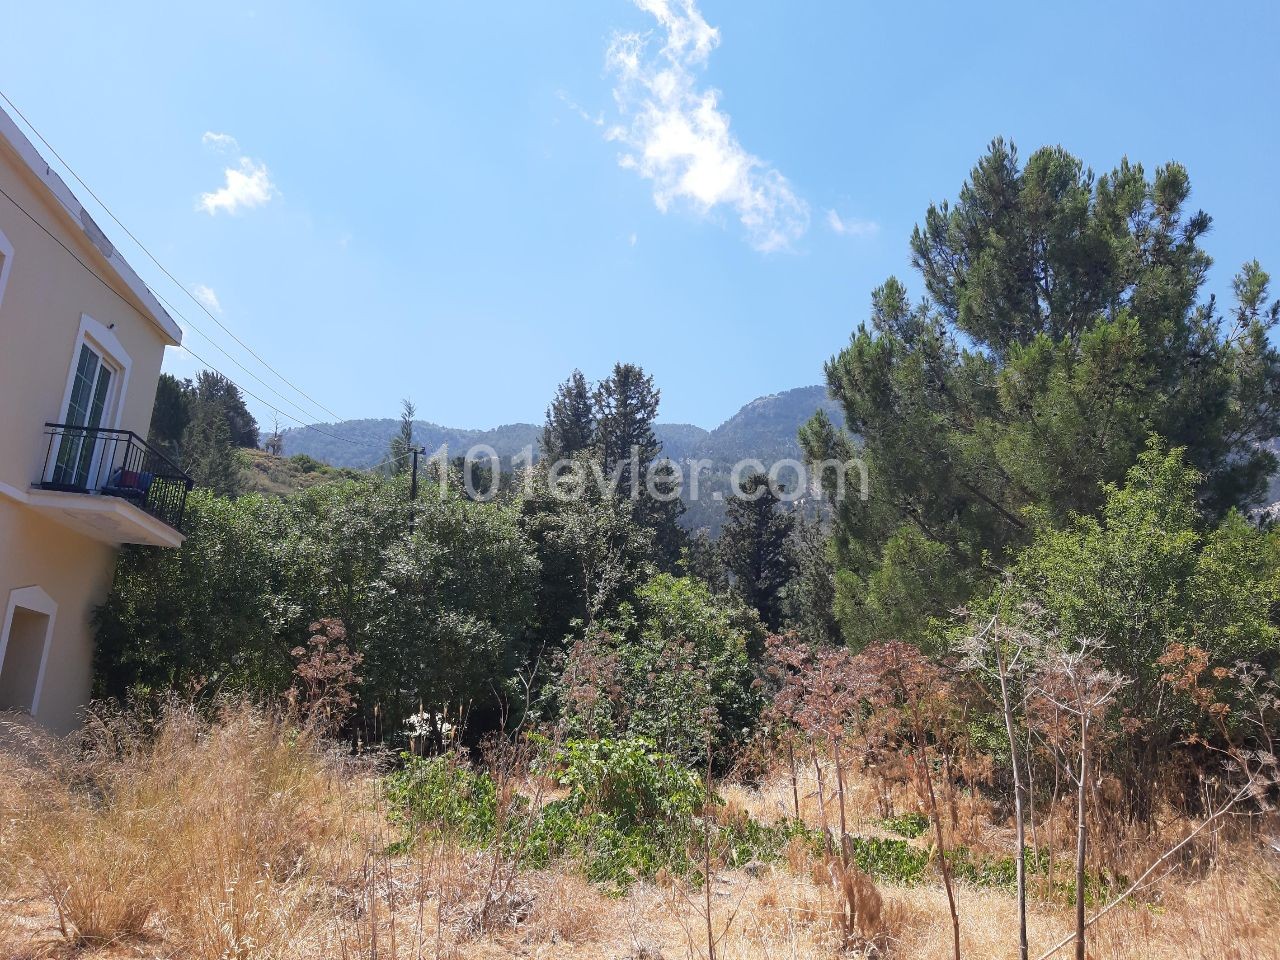 A PLOT OF LAND WITH EQUIVALENT COB, 2 HOUSES, 2175 DECARES (871 M2), OVERLOOKING A VALLEY FROM THE WEST, WITH A WATER MITE IN IT, WITH A VIEW OF NATURE, MOUNTAINS AND THE SEA, IN KYRENIA LAPTA ** 